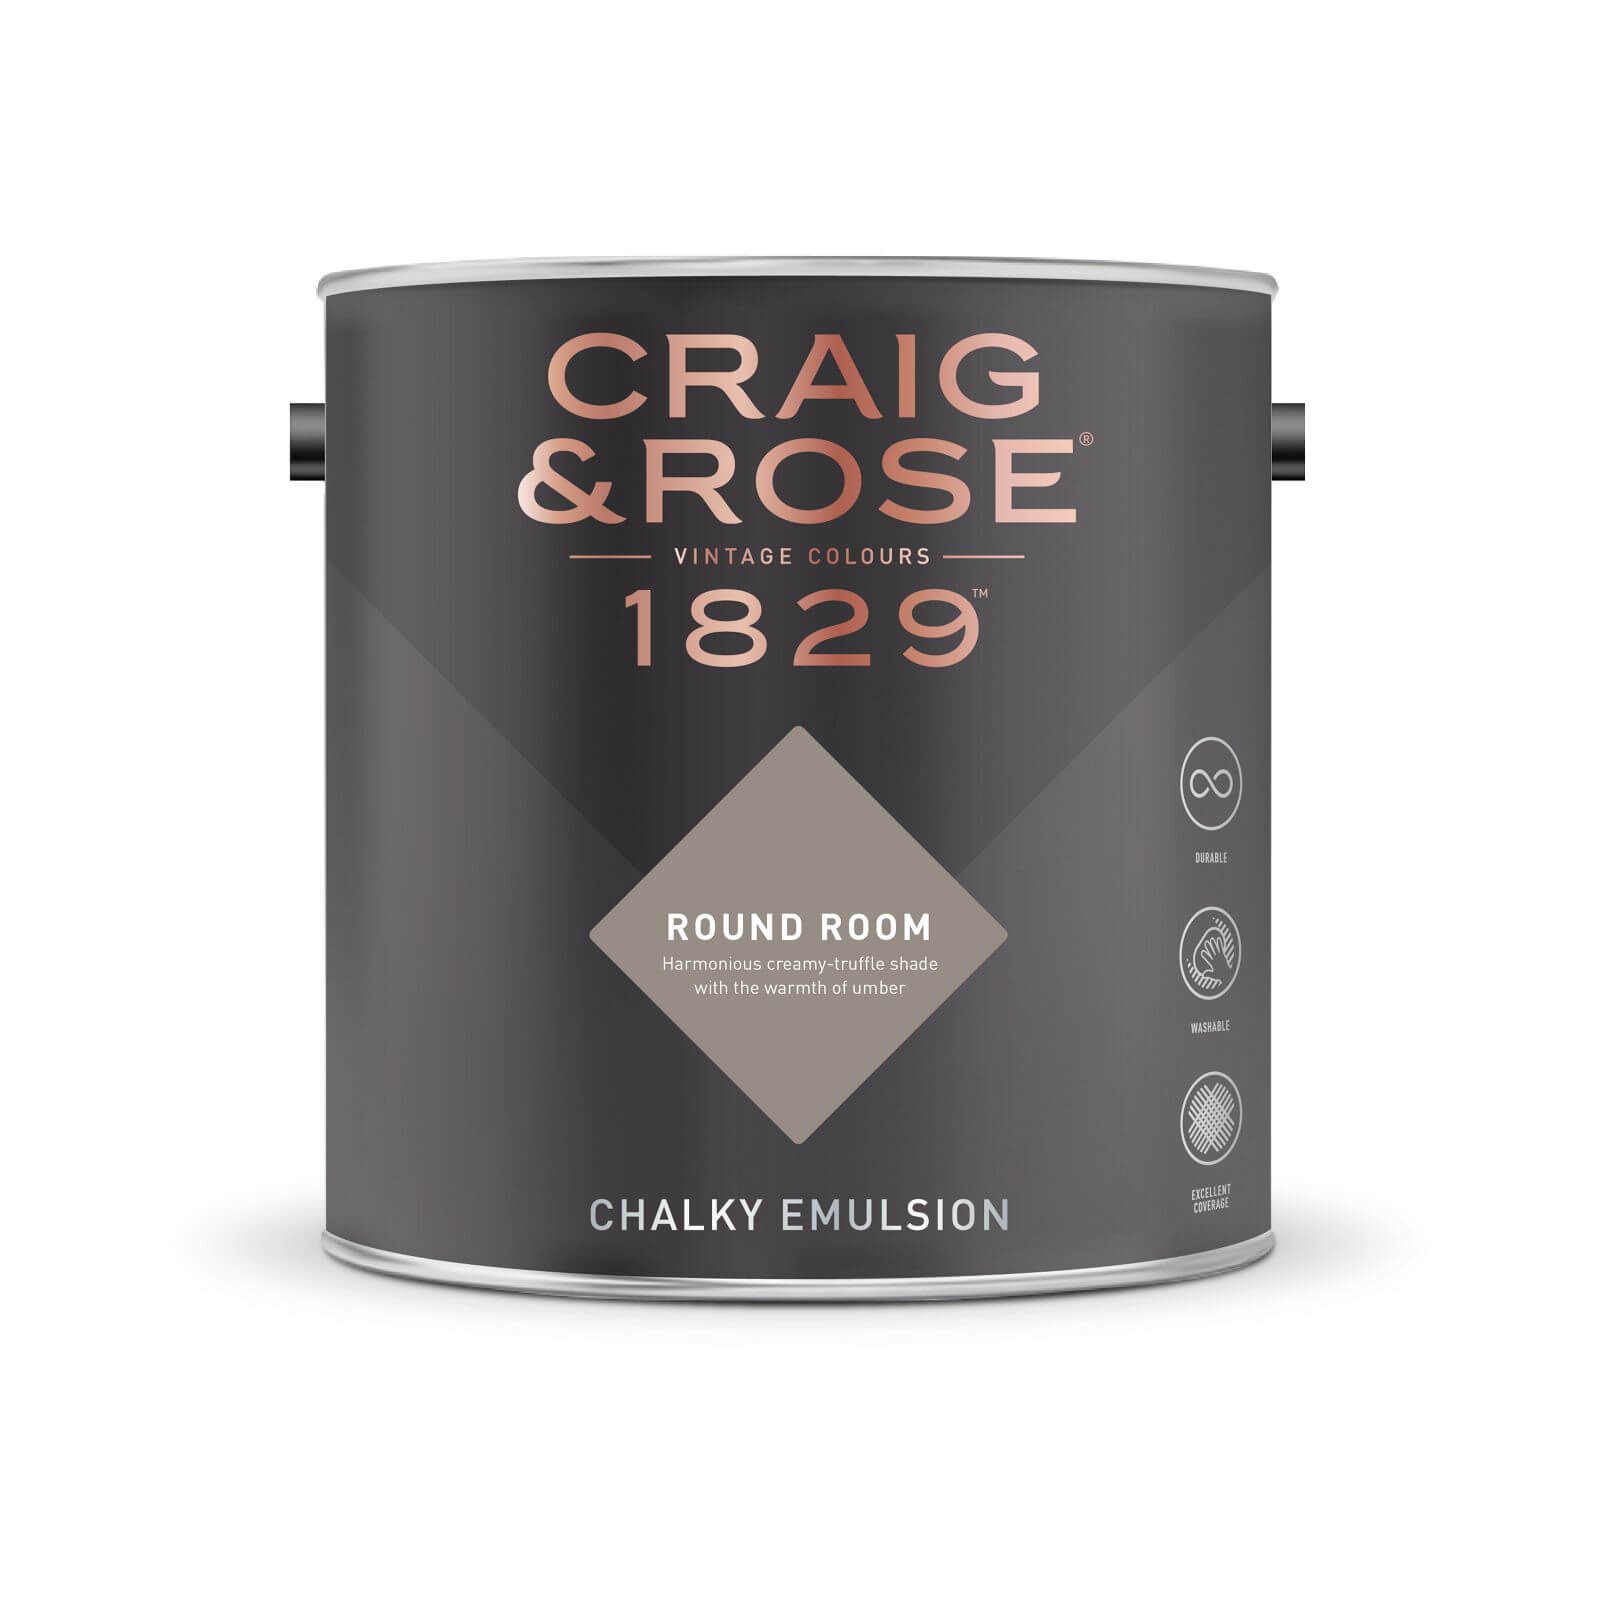 Craig & Rose 1829 Chalky Emulsion Paint Round Room - 5L